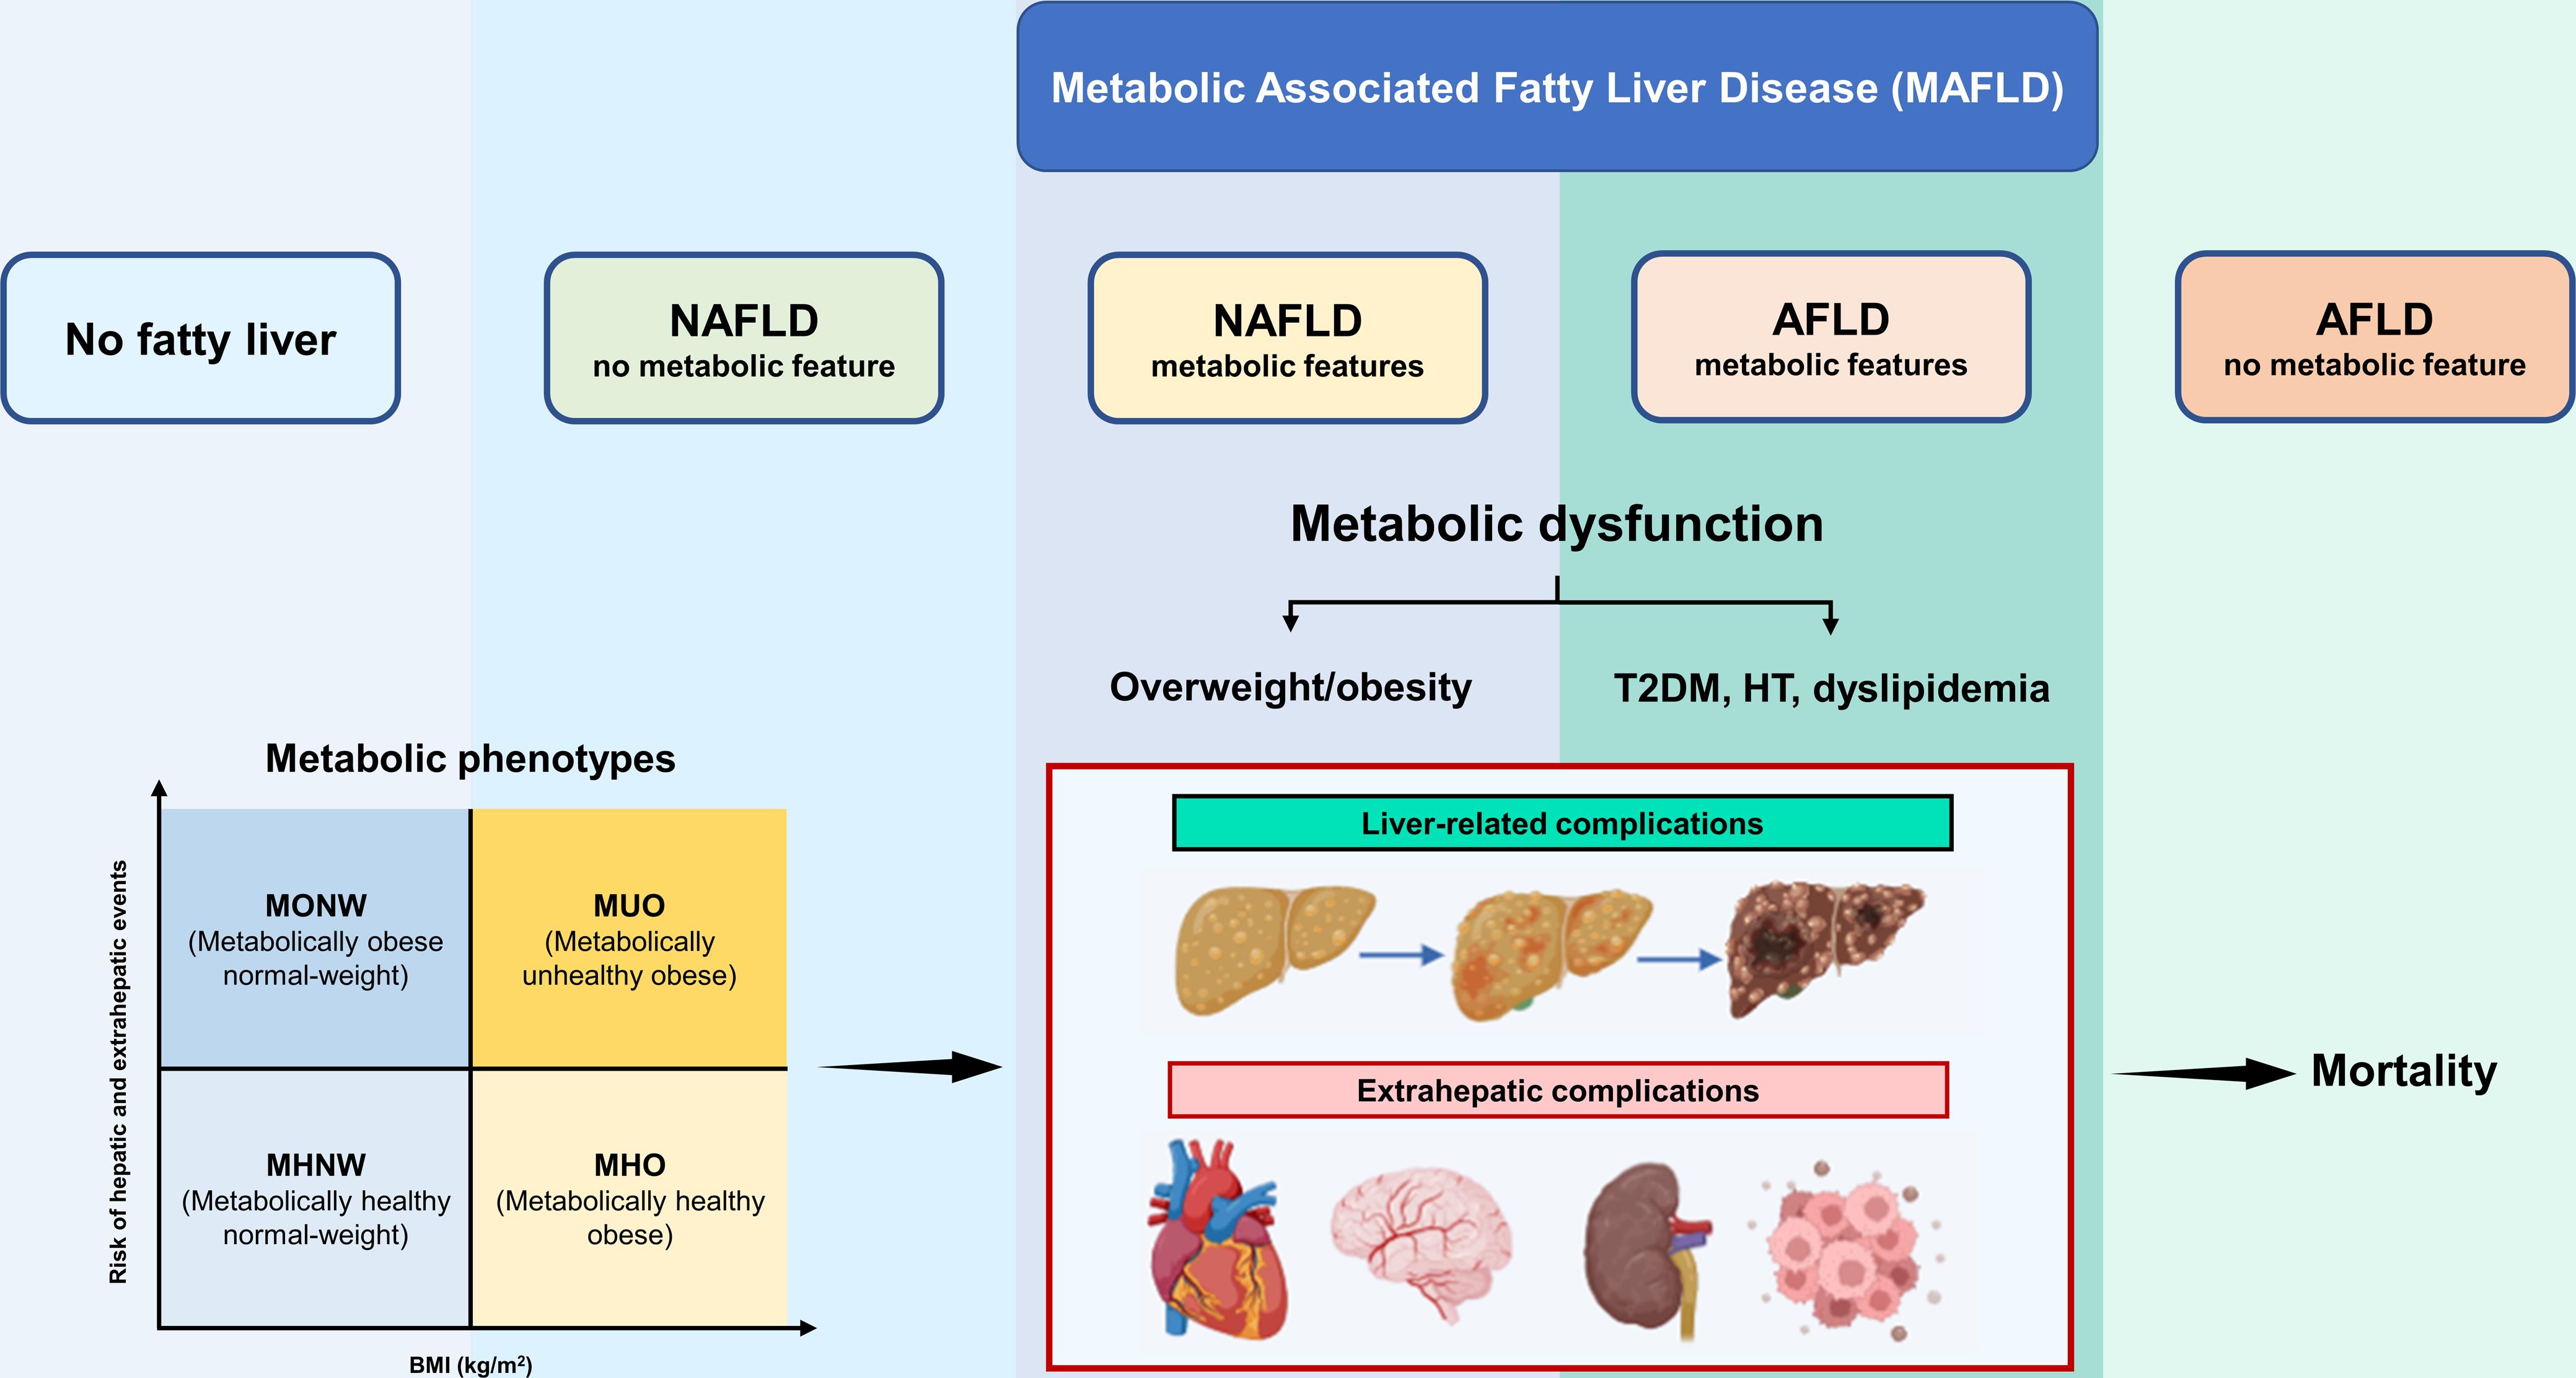 Metabolic phenotypes as drivers of health outcomes in patients with fatty liver diseases.